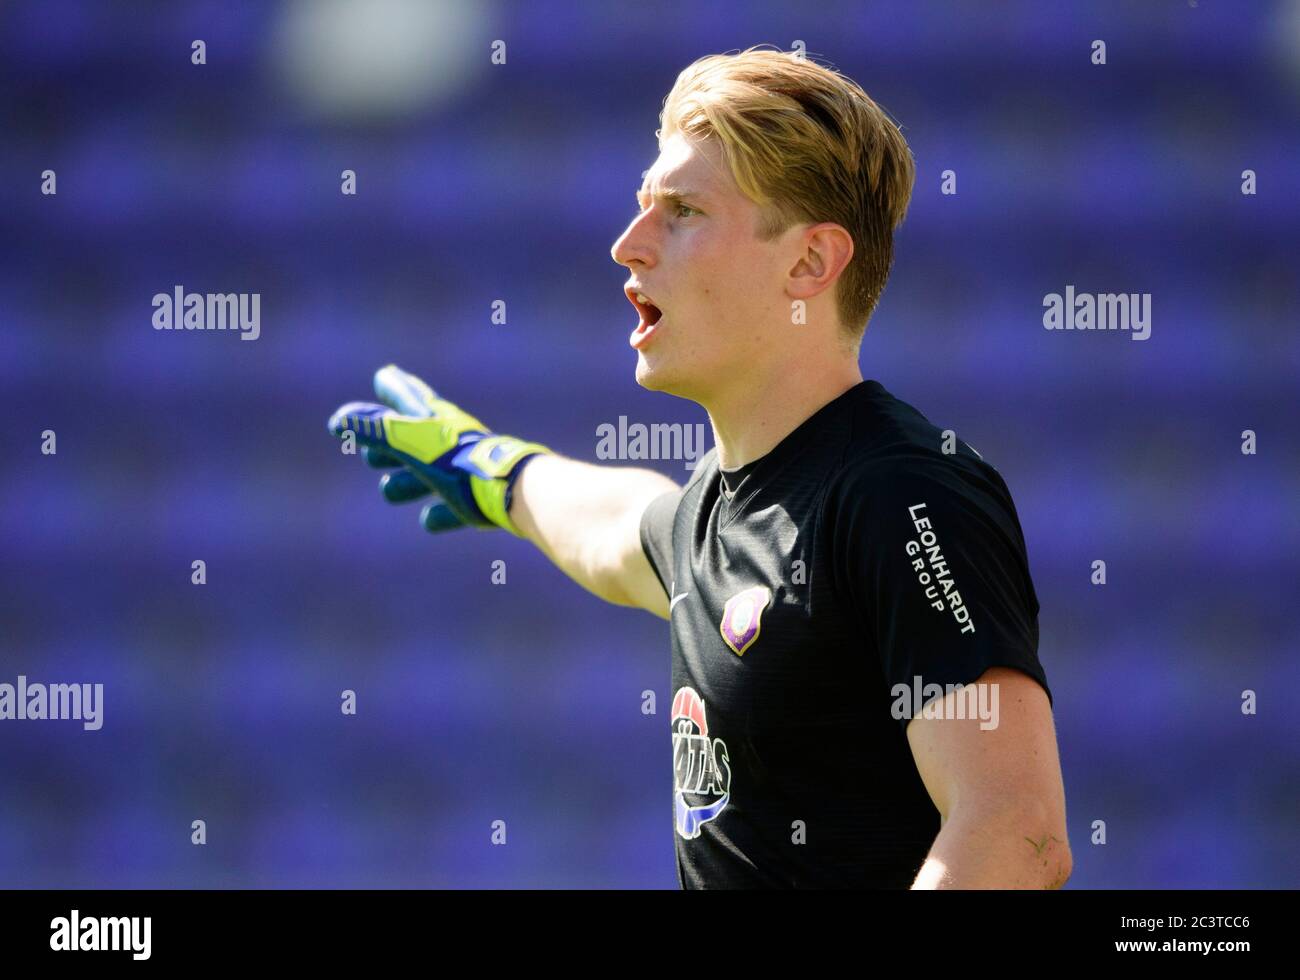 Aue, Germany. 21st June, 2020. Football: 2nd Bundesliga, FC Erzgebirge Aue - Hannover 96, 33rd matchday, at the Sparkassen-Erzgebirgsstadion. Aue's goalkeeper Robert Jendrusch gesturing. Credit: Robert Michael/dpa-Zentralbild/dpa - IMPORTANT NOTE: In accordance with the regulations of the DFL Deutsche Fußball Liga and the DFB Deutscher Fußball-Bund, it is prohibited to exploit or have exploited in the stadium and/or from the game taken photographs in the form of sequence images and/or video-like photo series./dpa/Alamy Live News Stock Photo